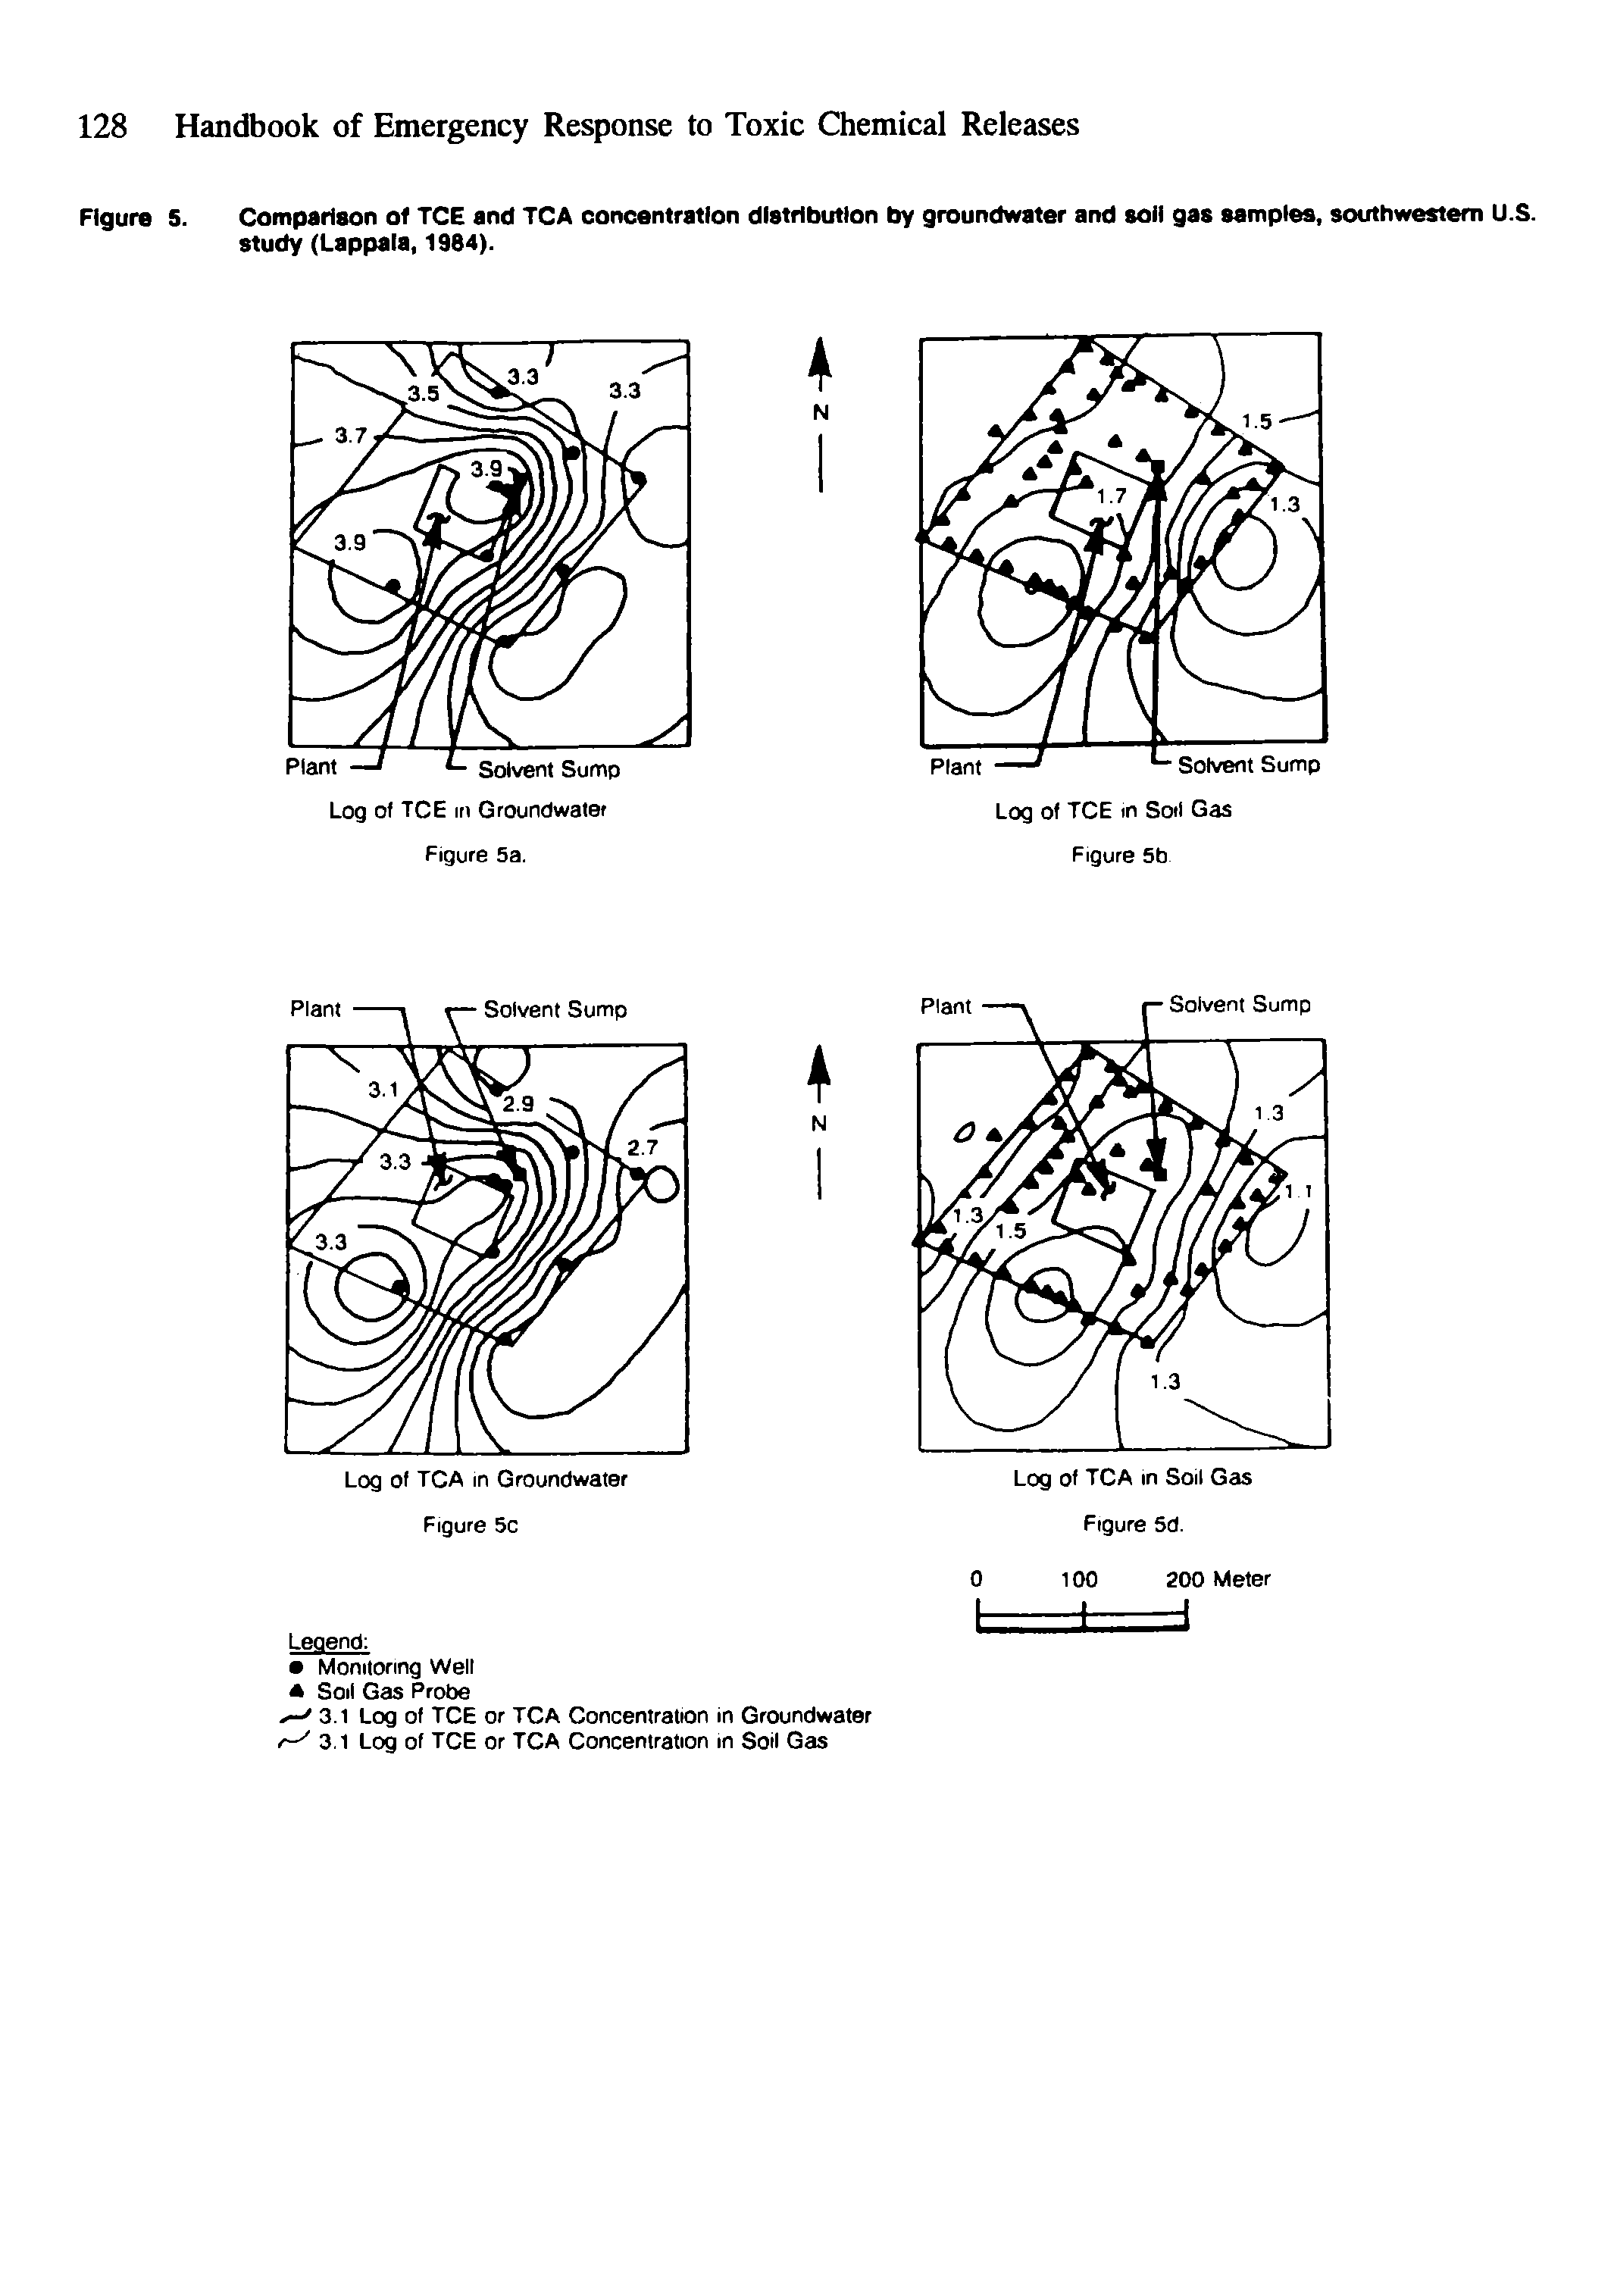 Figure 5. Comparison of TCE and TCA concentration distribution by groundwater and soii gas sampies, southwestern U.S. study (Lappaia, 1984).